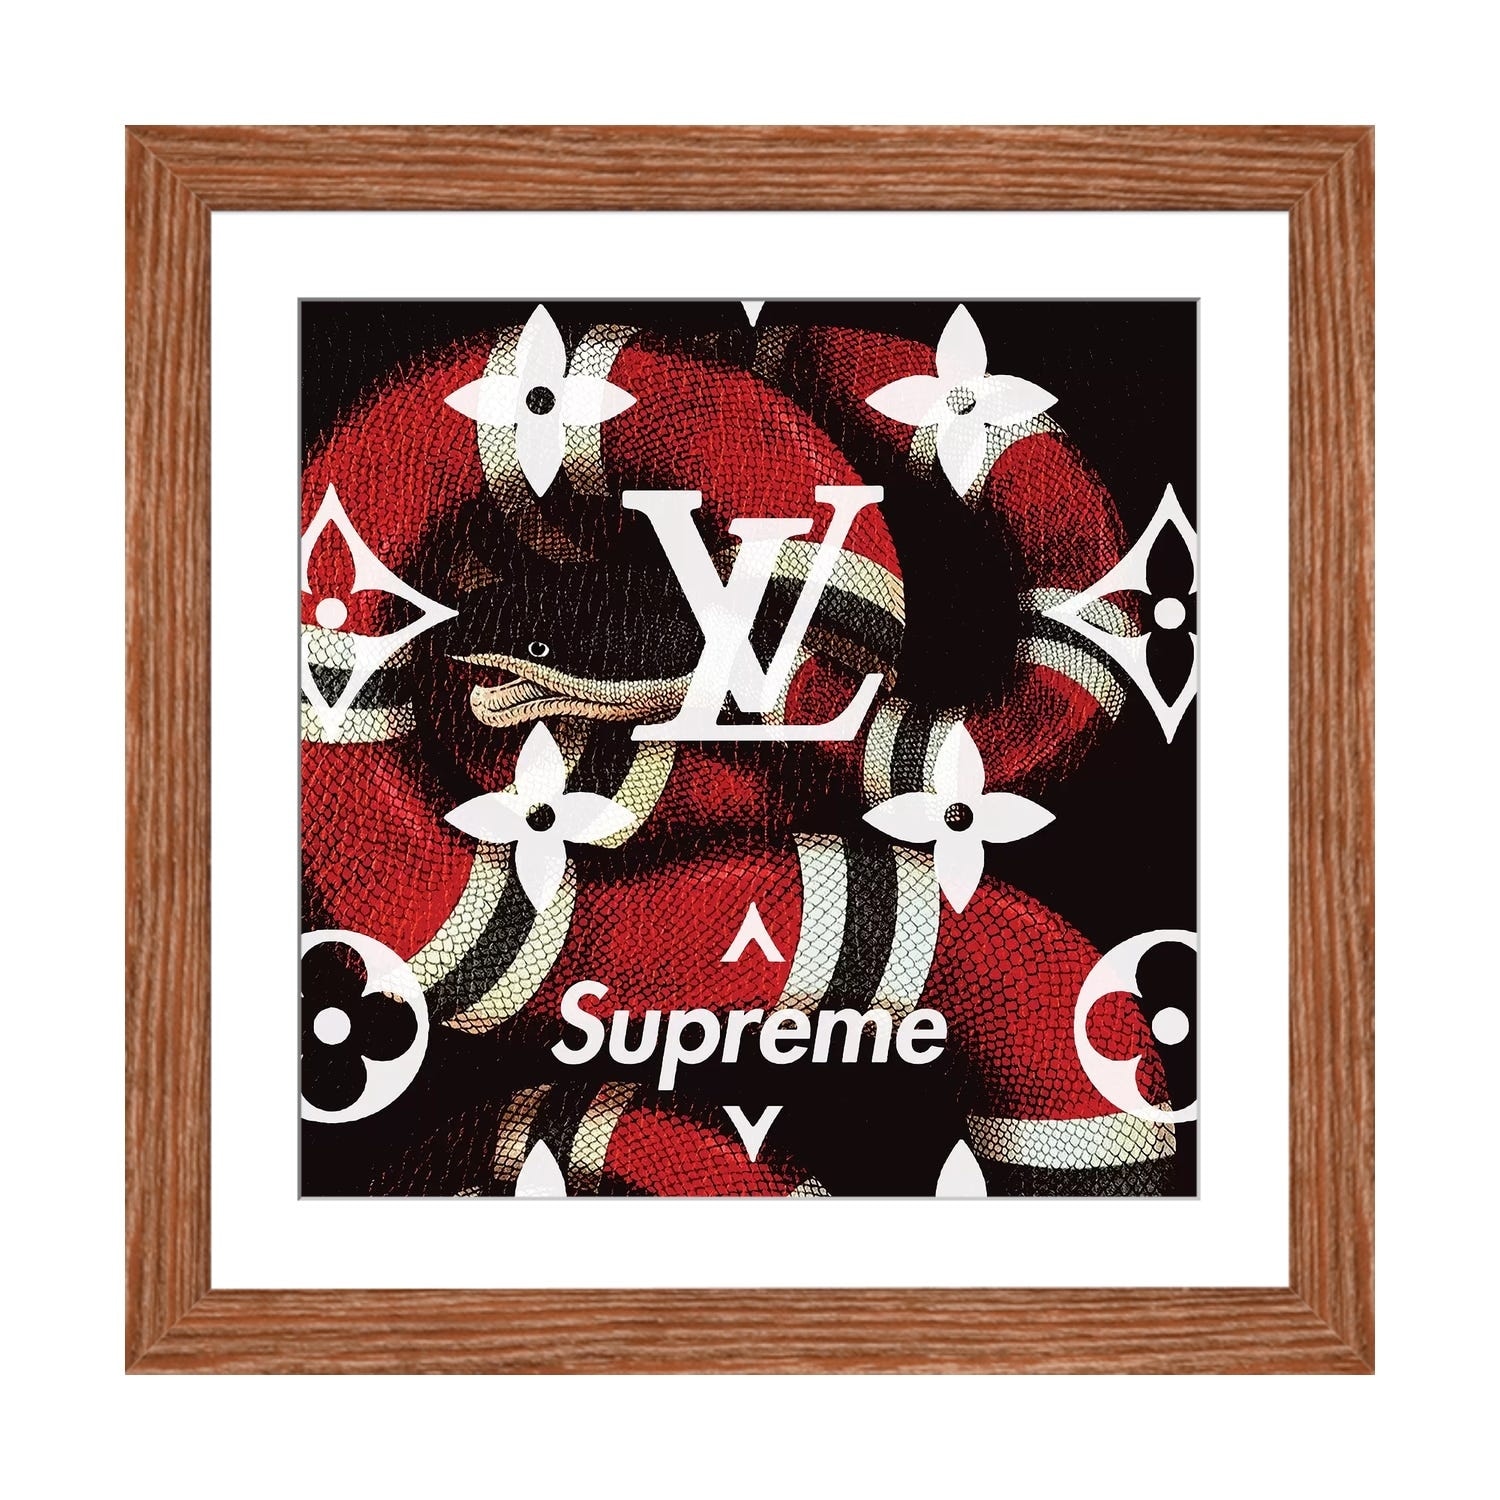 Louis Vuitton Supreme In Red Bathroom Set With Shower Curtain